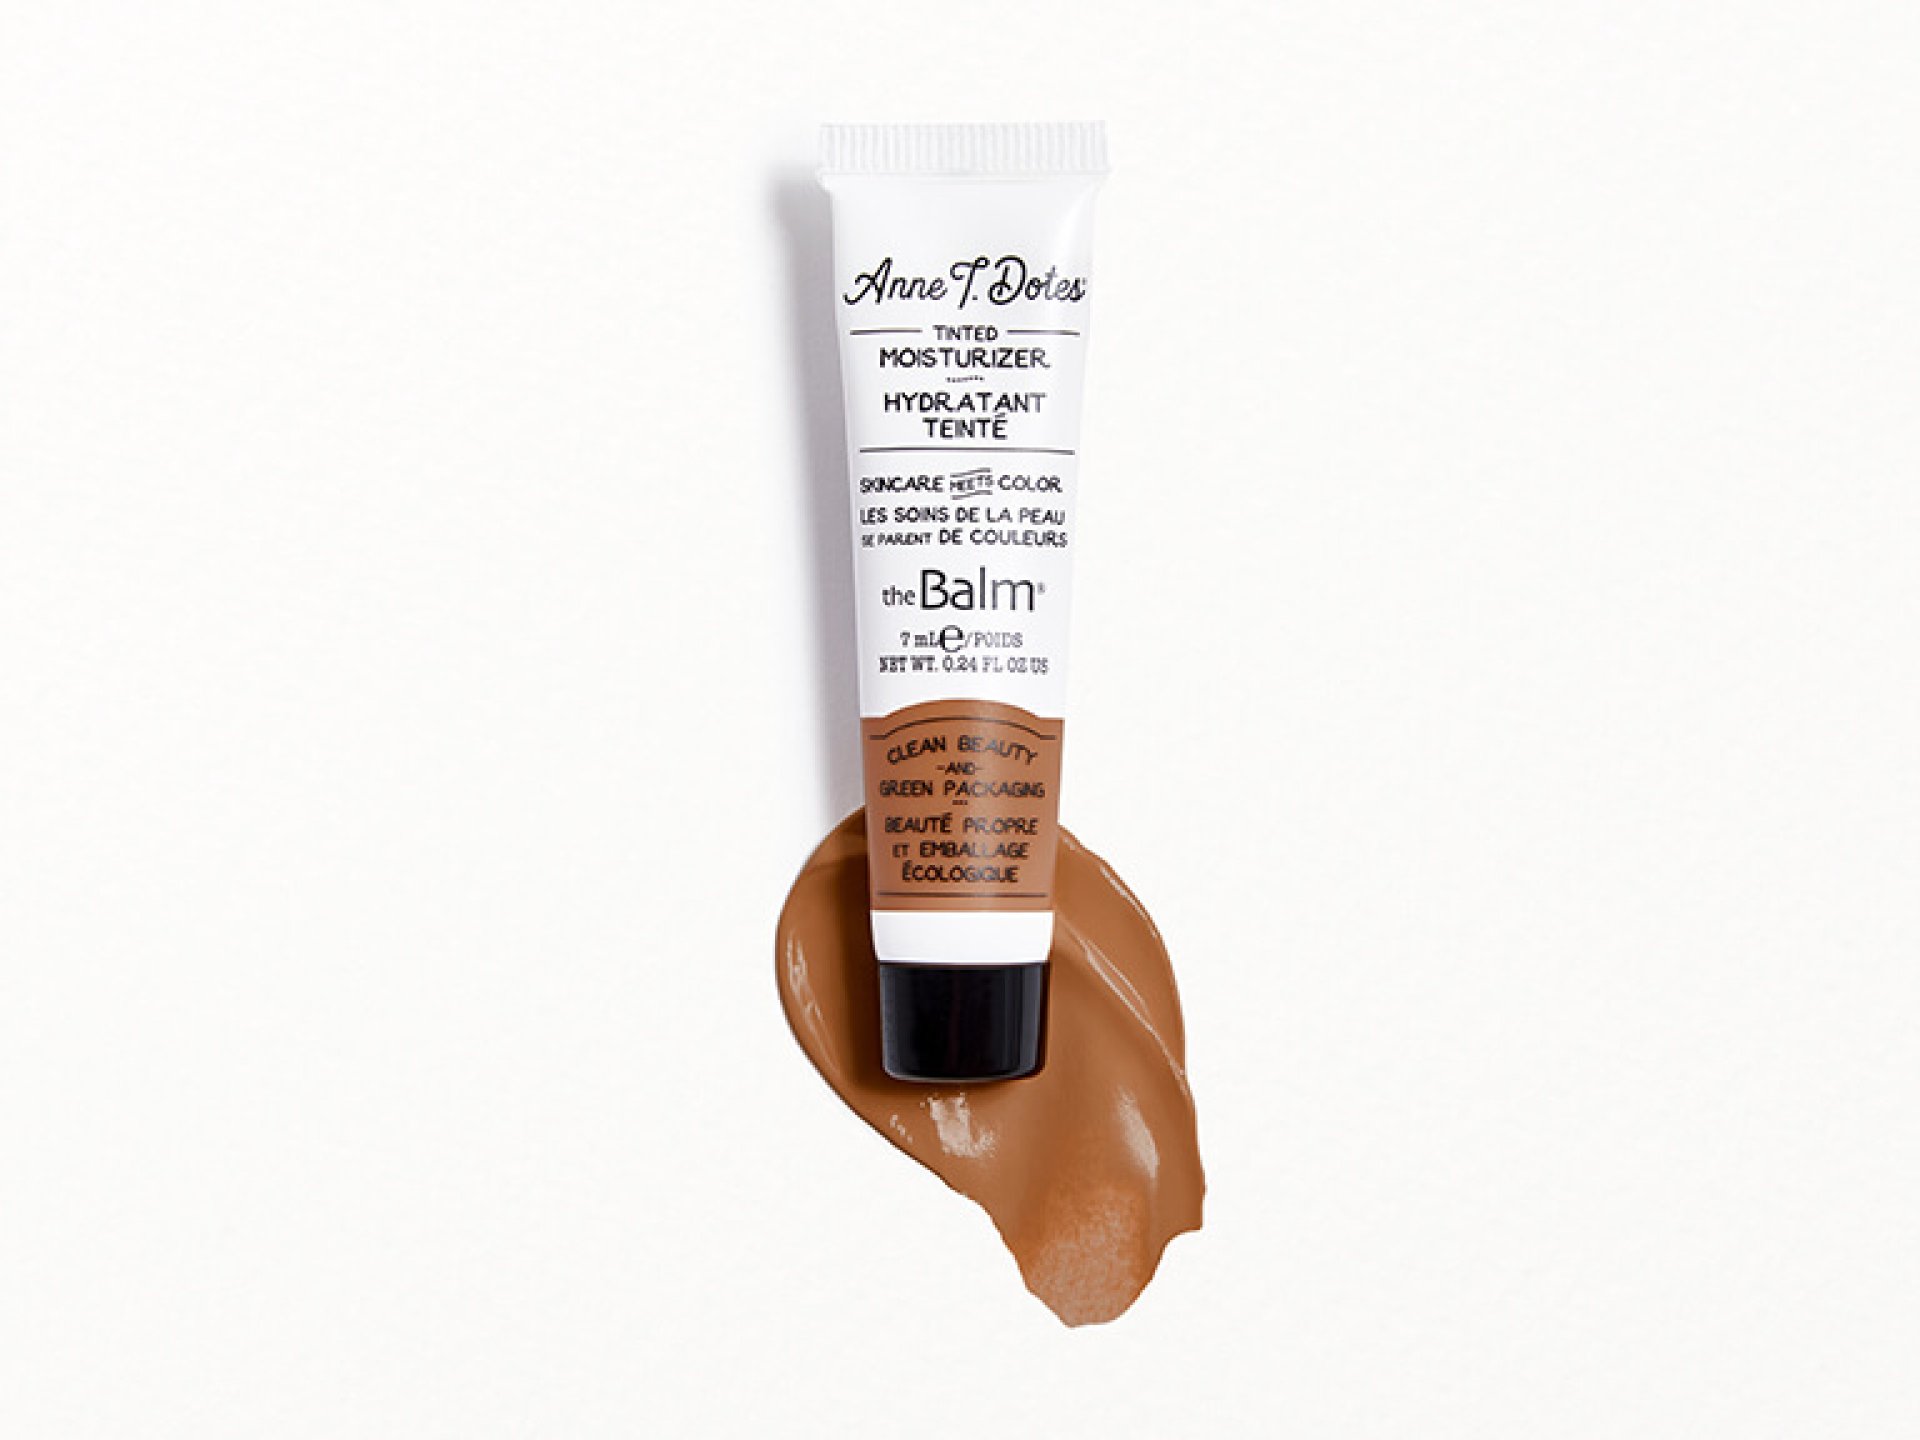 THEBALM COSMETICS Anne T. Dotes Tinted Moisturizer in #46